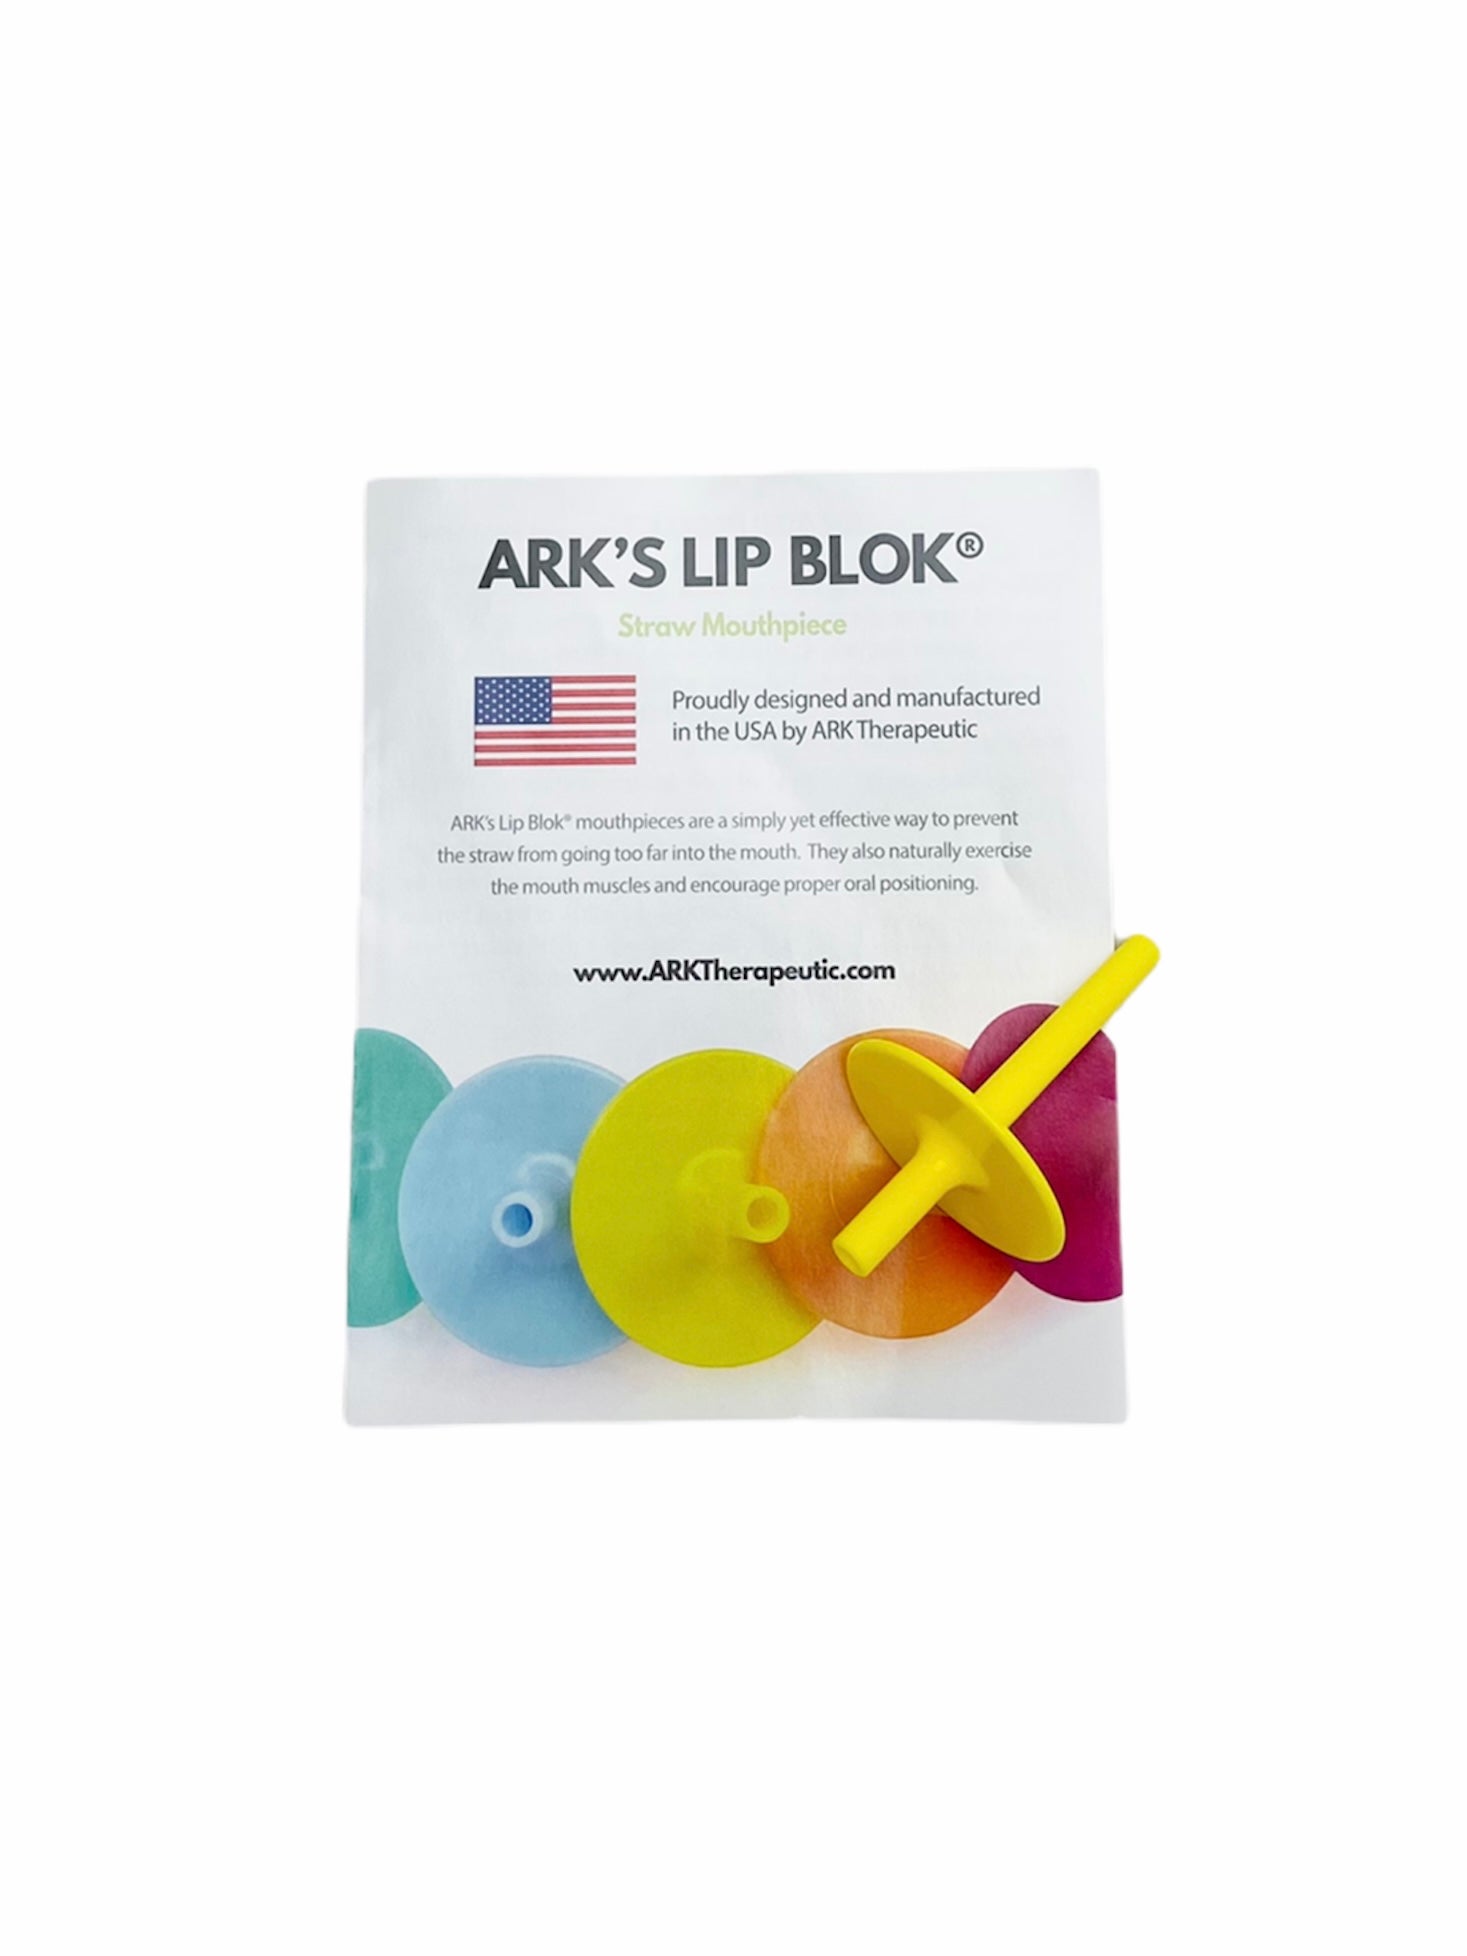 3/4" Yellow Ark Lip Blok placed on top of packaging with white background